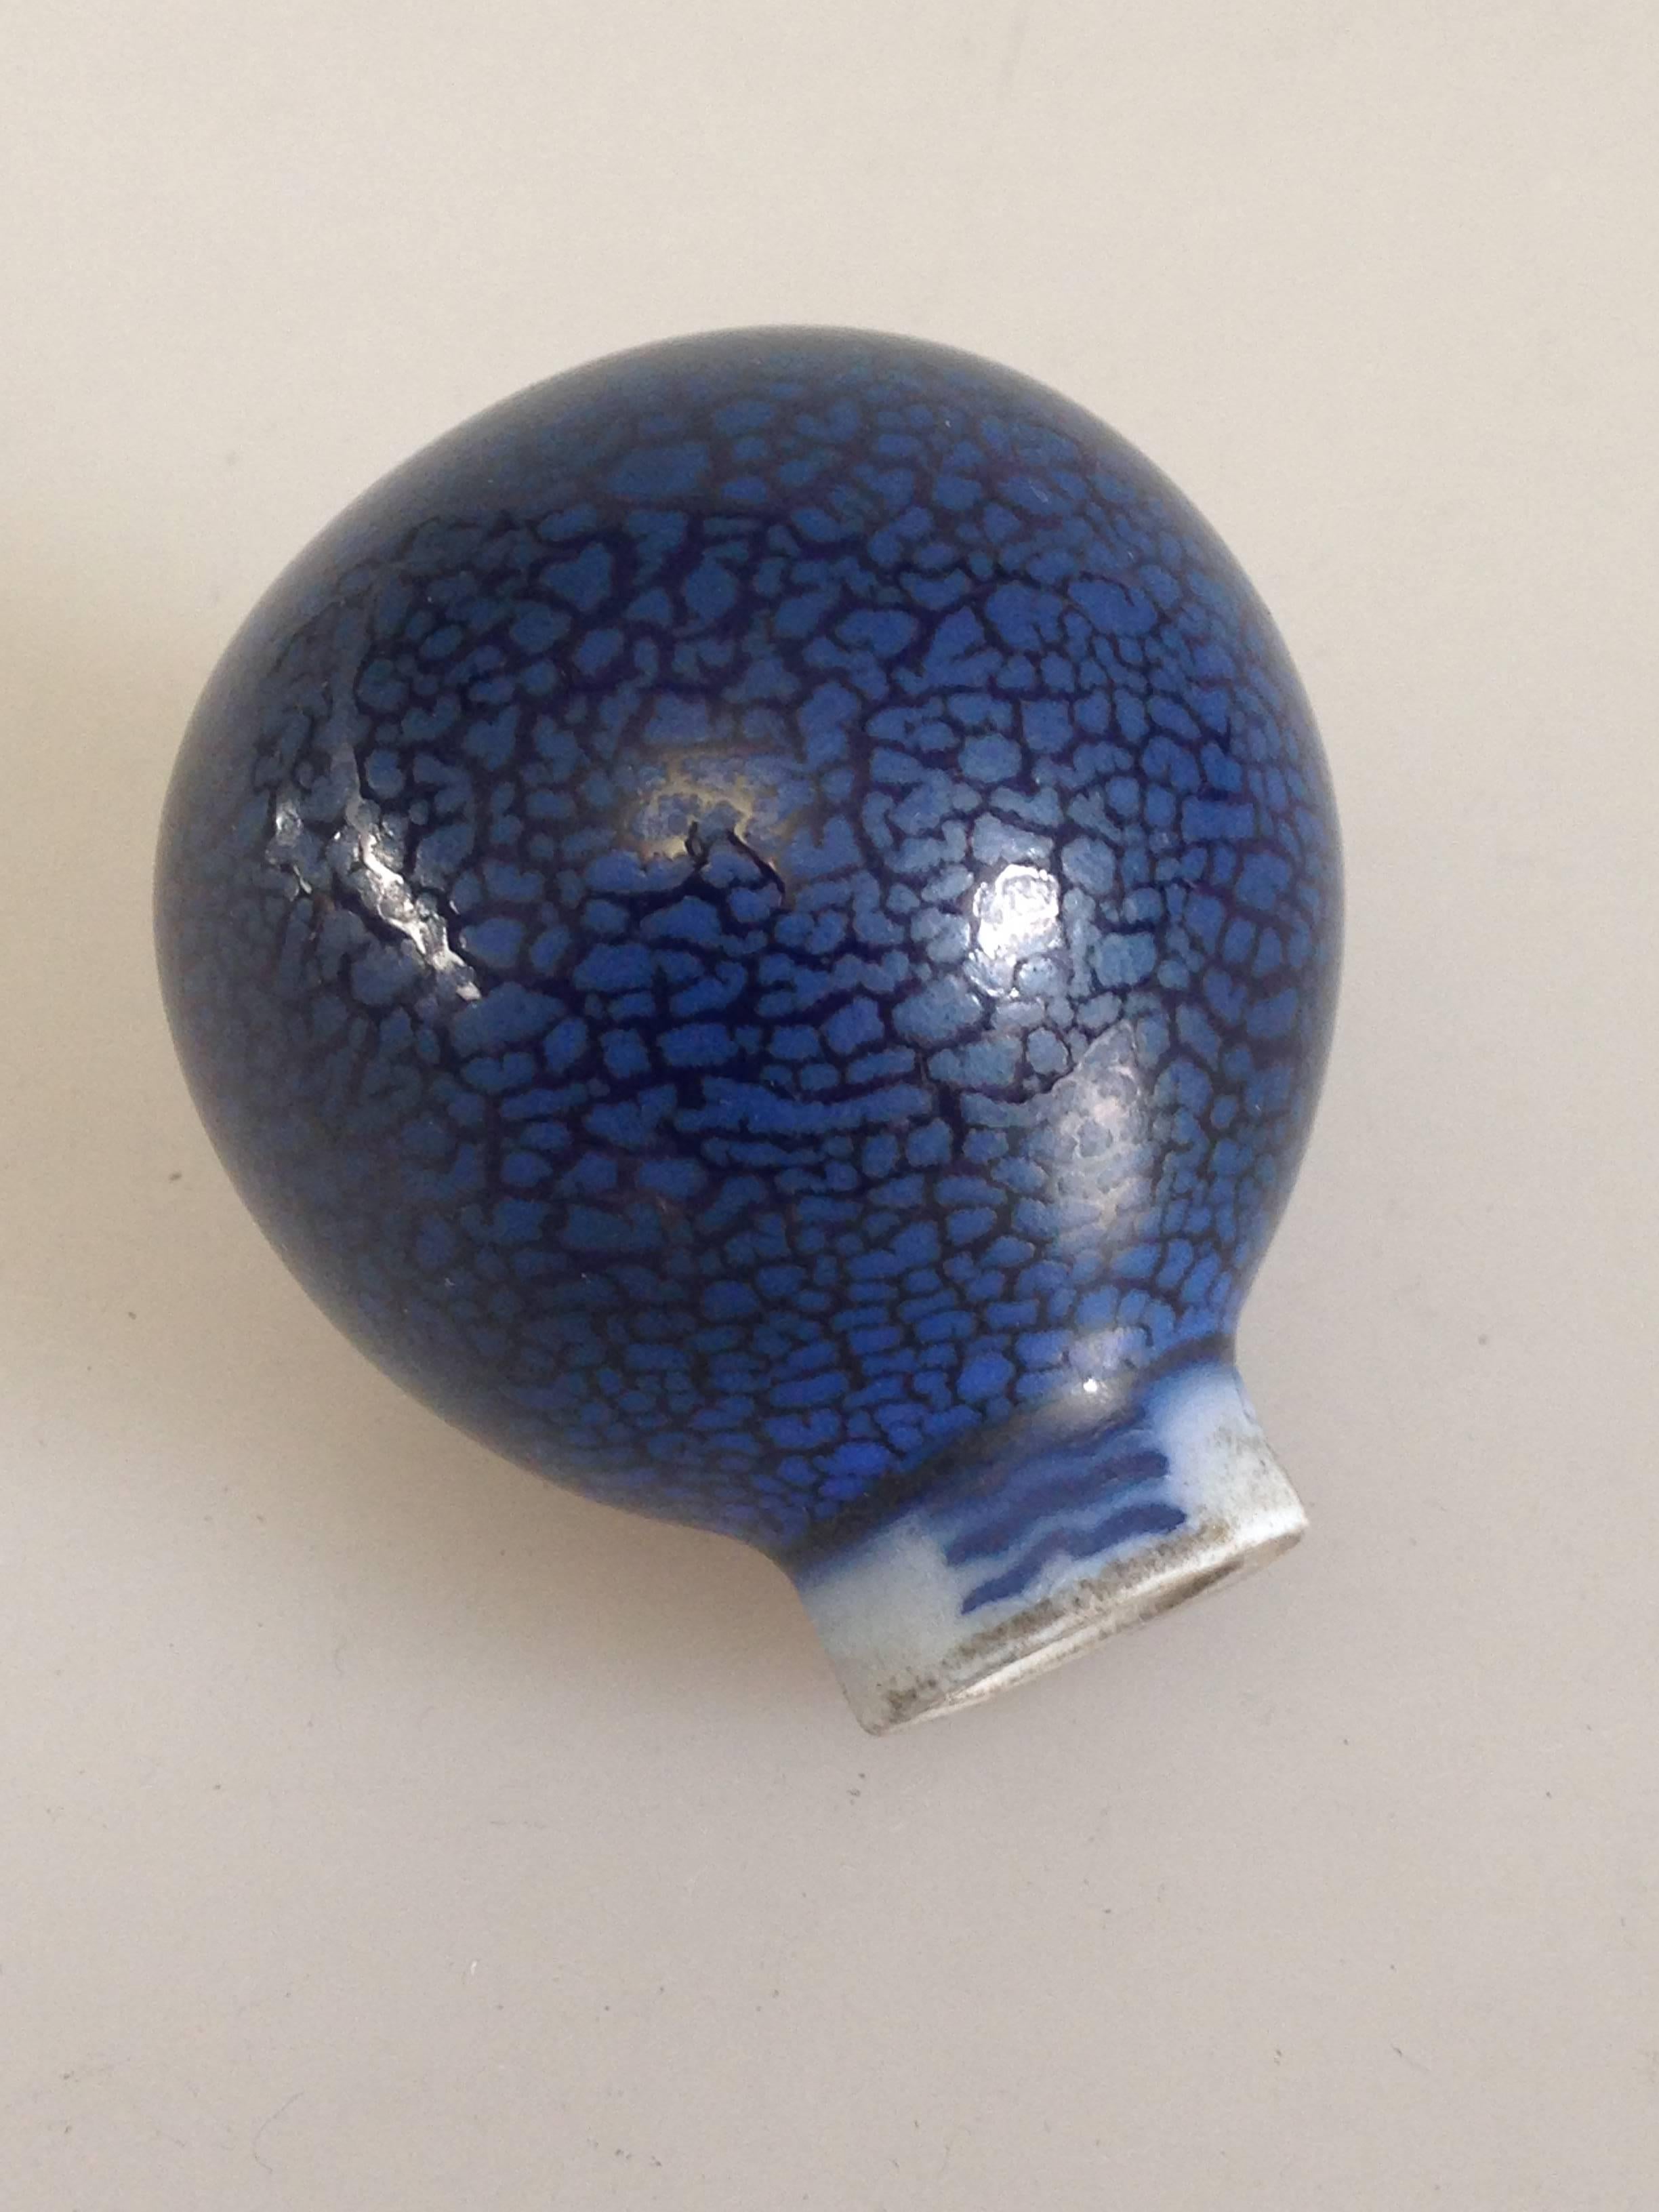 The snakeskin glaze is done by Valdemar Engelhart. A very rare piece, only Royal Copenhagen cane handle we know of with snake or crystalline glaze.